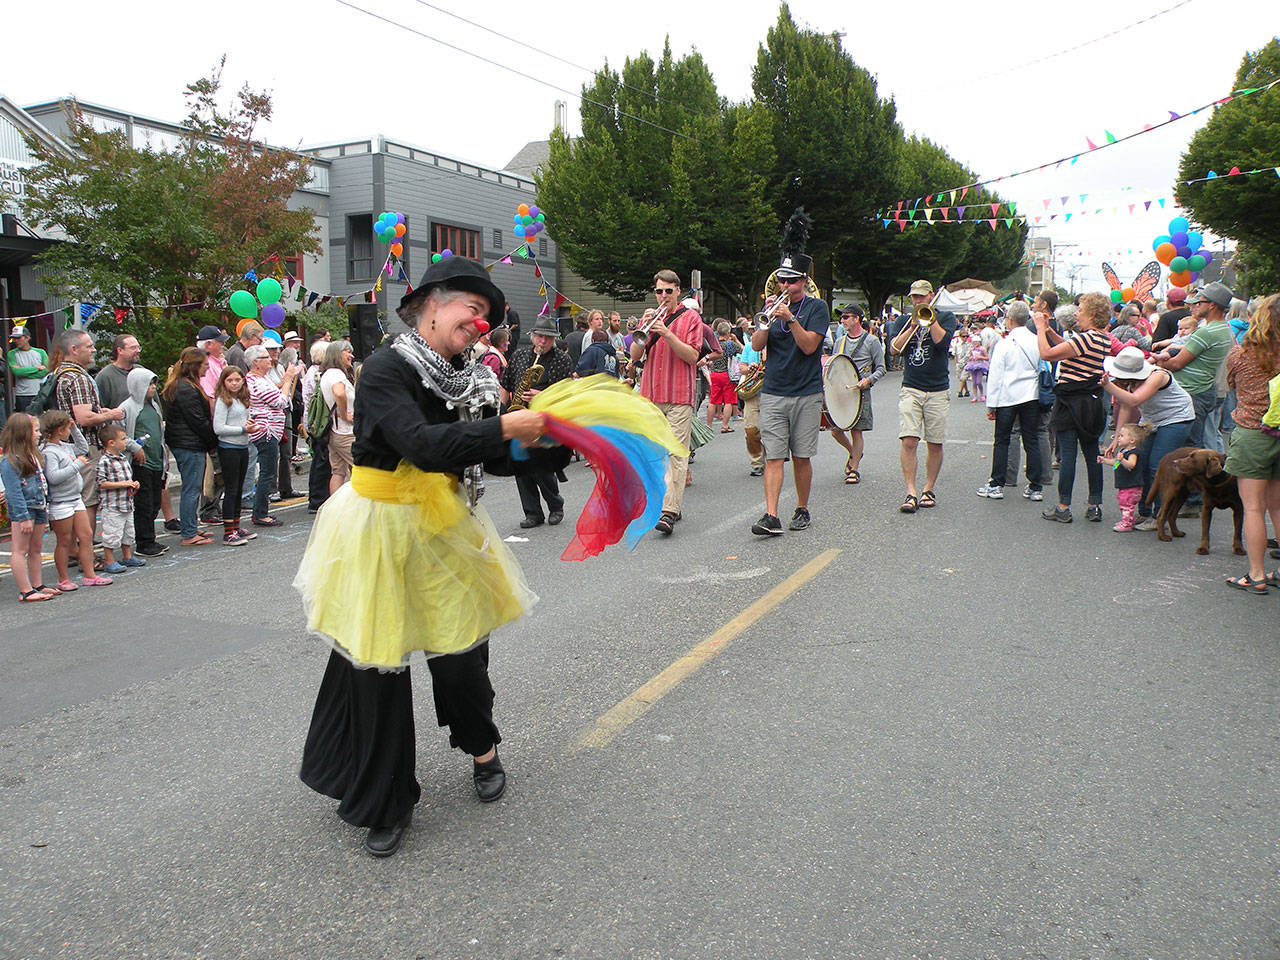 A clown at the Uptown Street Fair leads the band during the annual parade last year. (Mari Mullen)